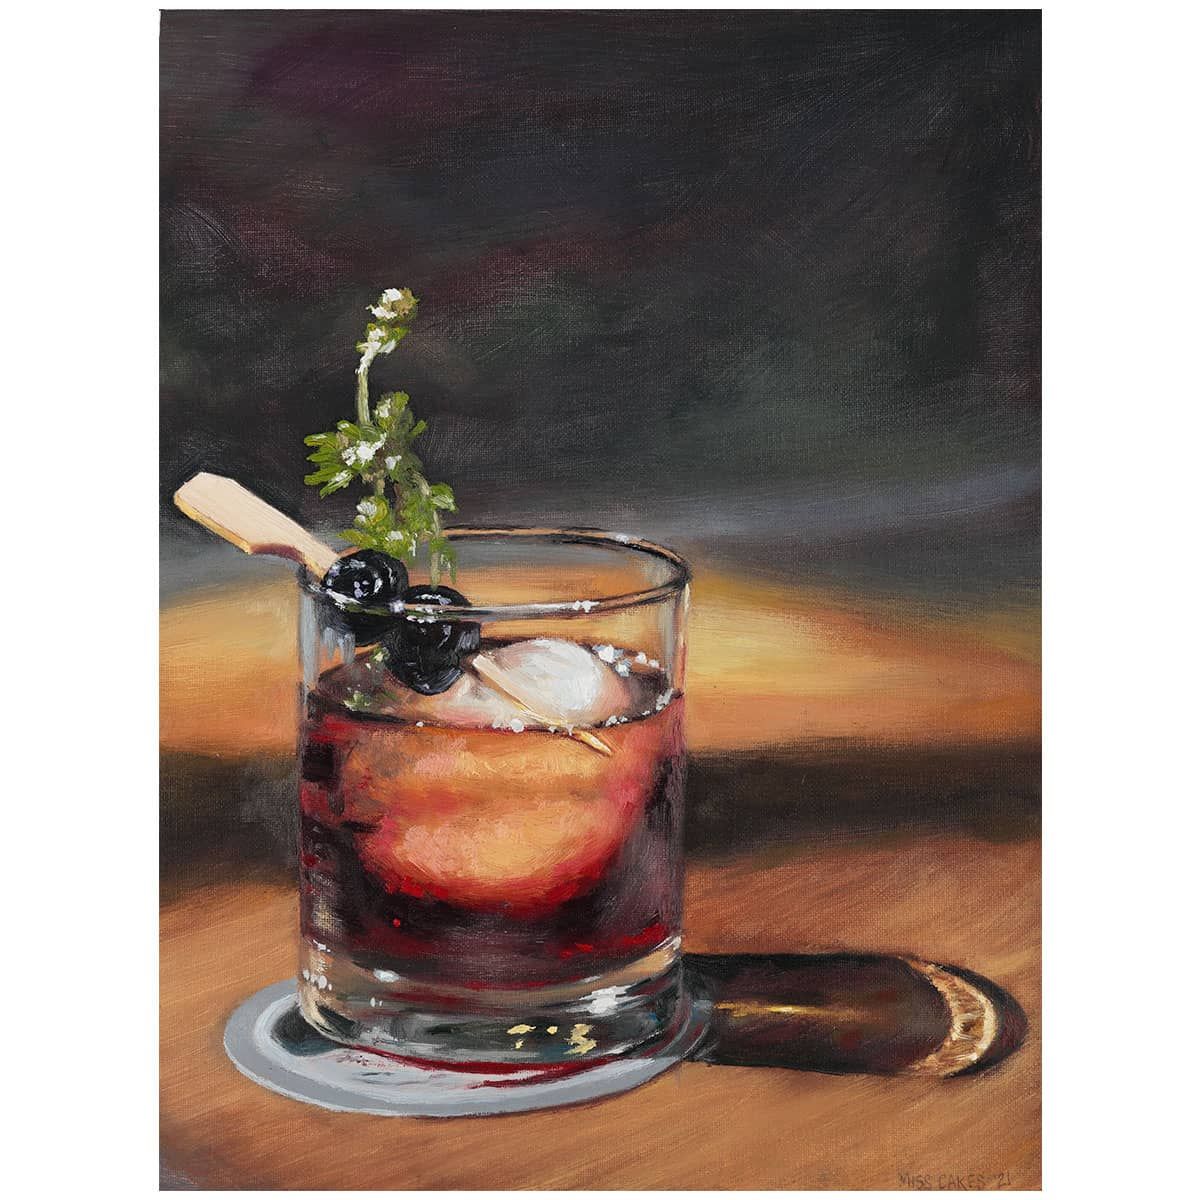 Charvin Extra Fine Oil artwork by Miss Cakes, Emmy Kline